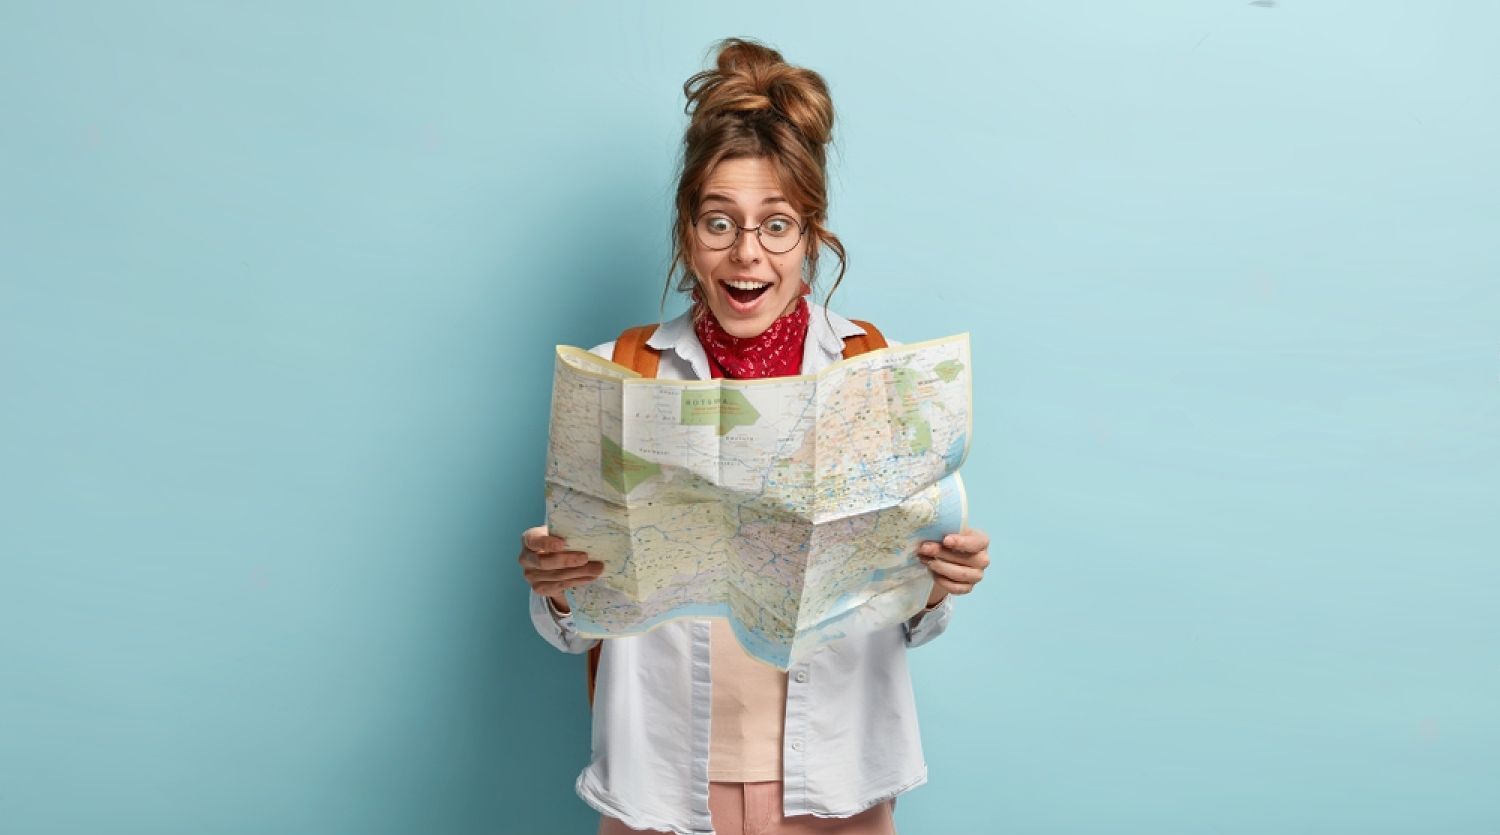 Stock Photo Photo Of Happy Shocked Female Stares At Map Enjoys Adventure During Summer Vacations Joyful To 1395204173 Transformed 3cfb584e 1920w 